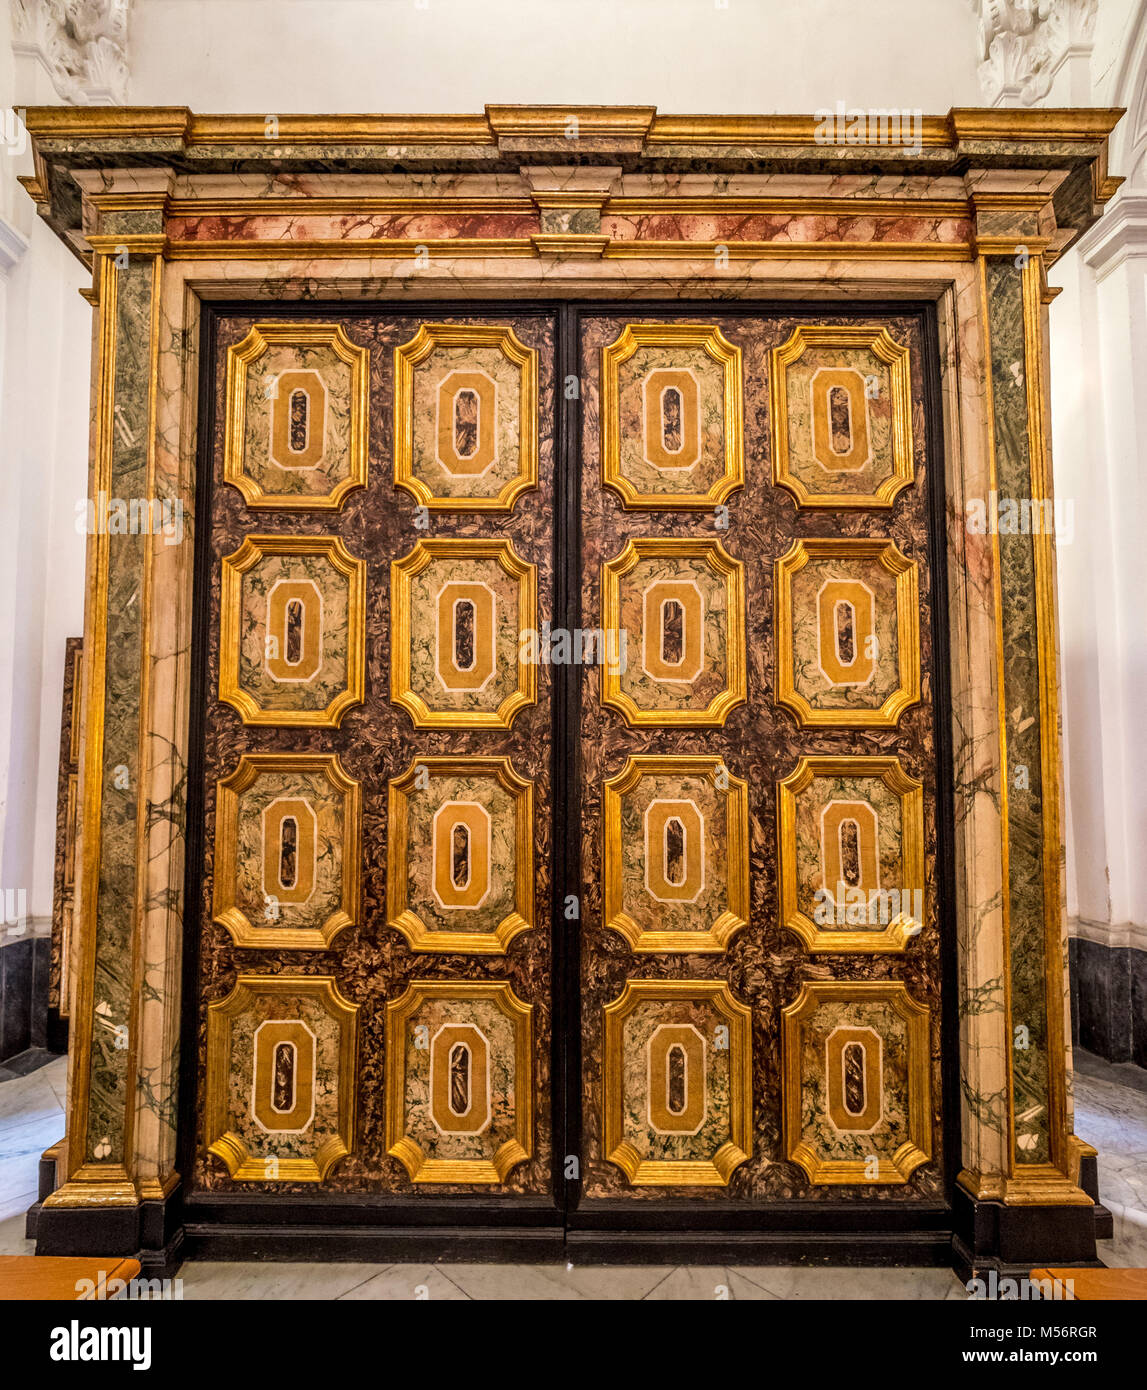 Ornate wood and marble paneling inside Santo Stefano Catholic church and former cathedral on the island of Capri, Italy. Stock Photo